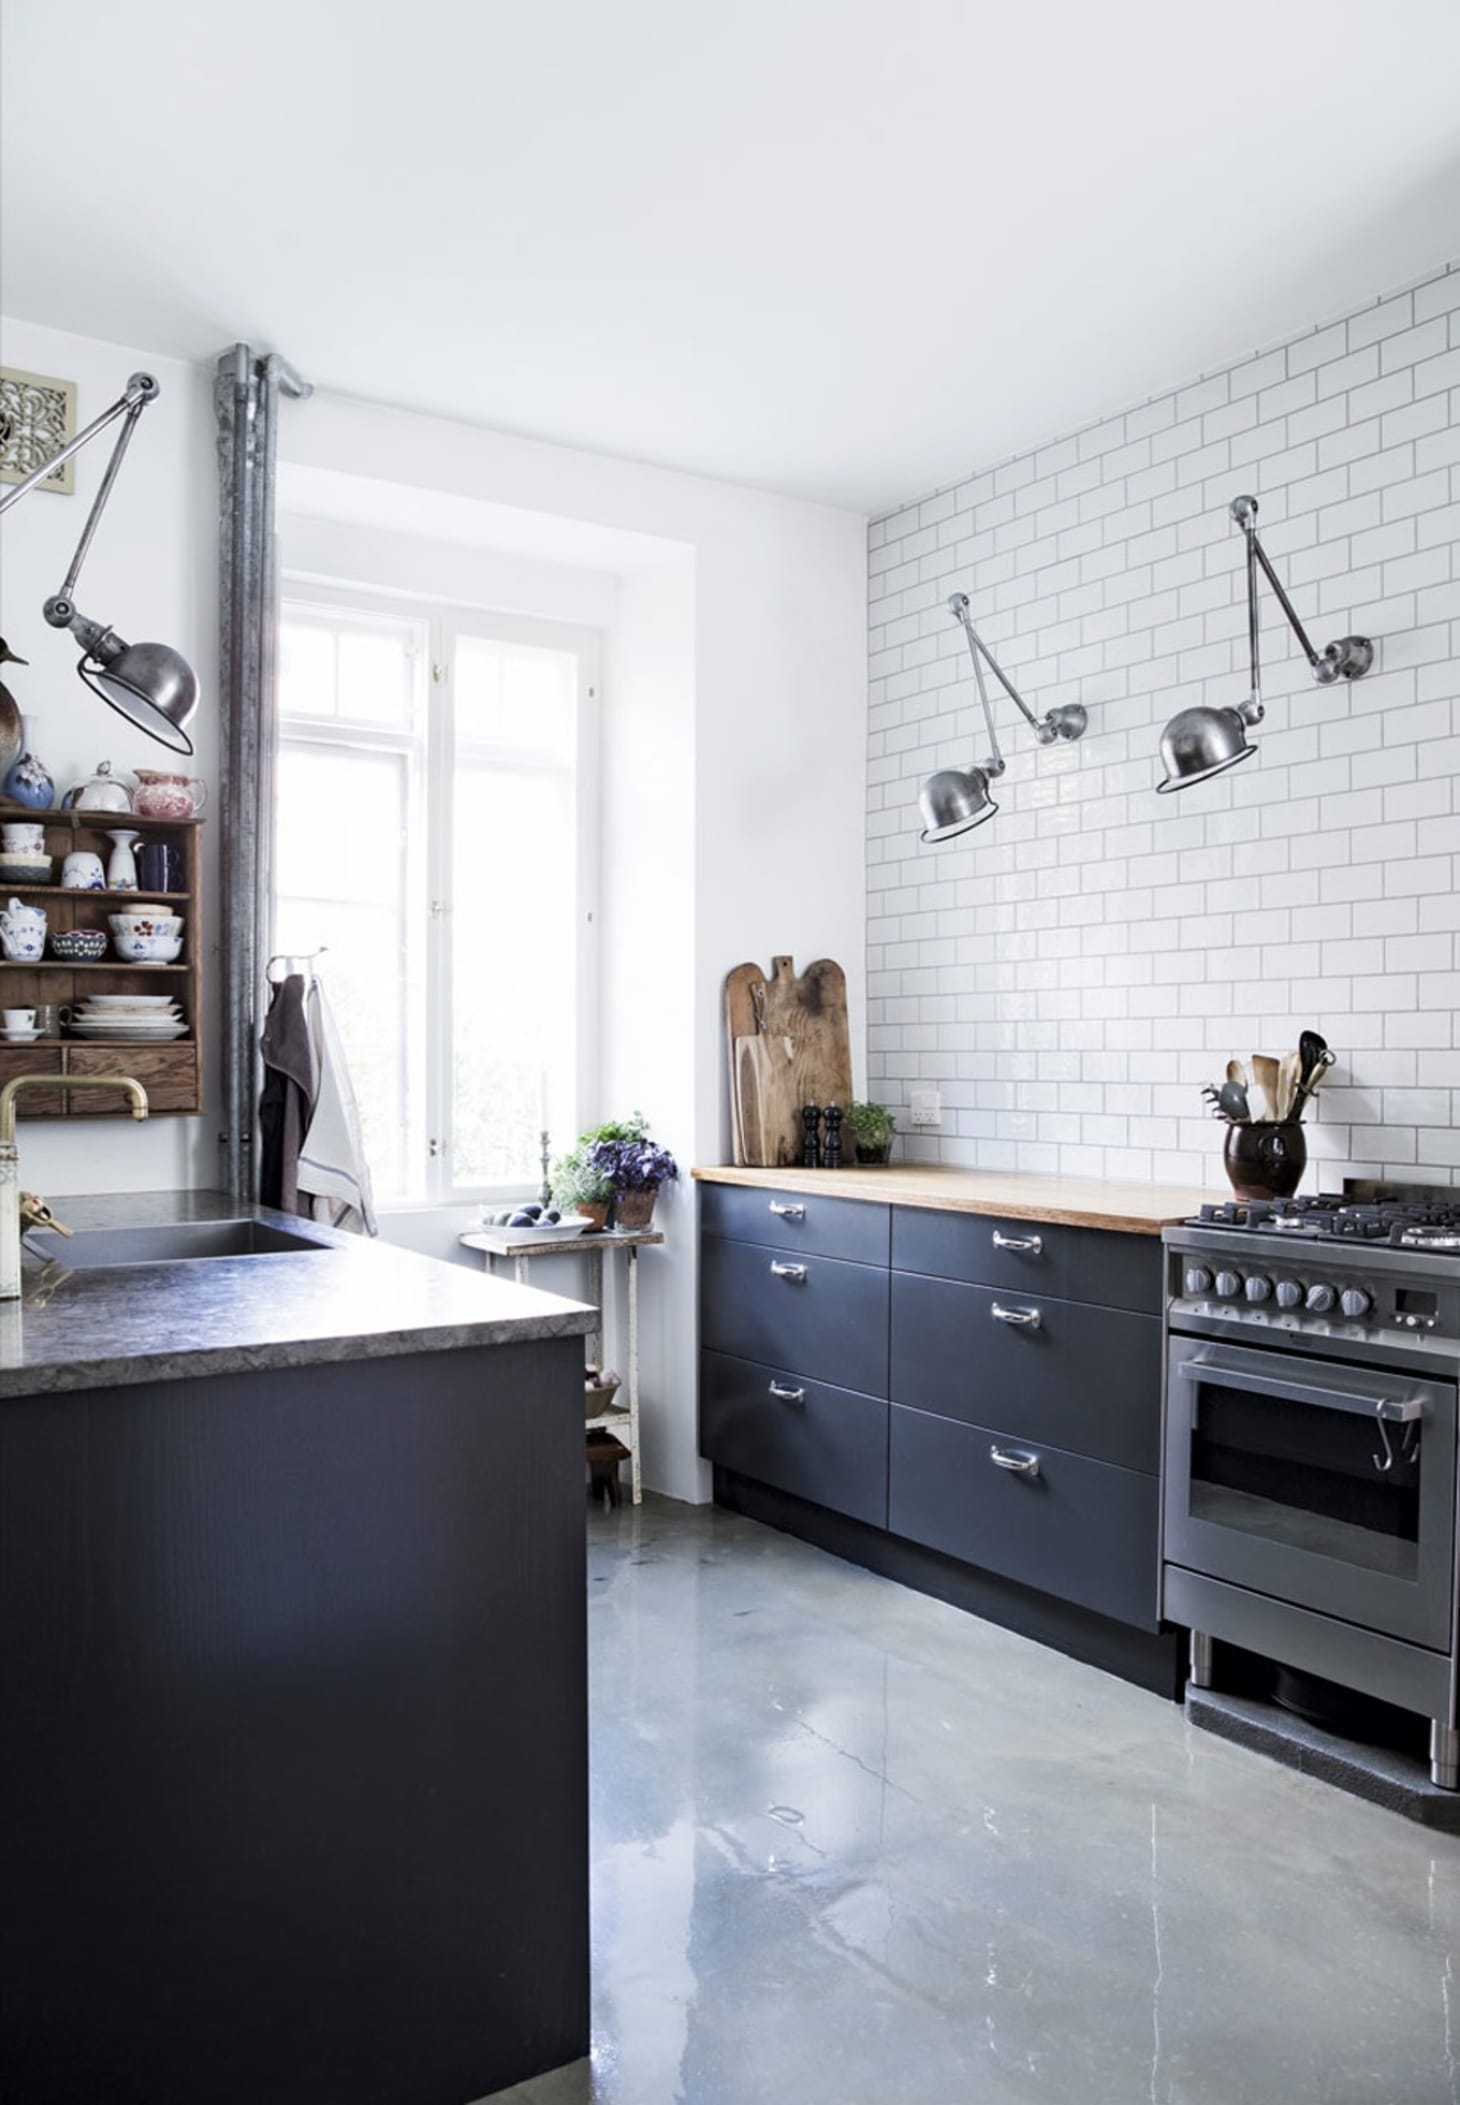 Kitchens Without Upper Cabinets: Should You Go Without ...